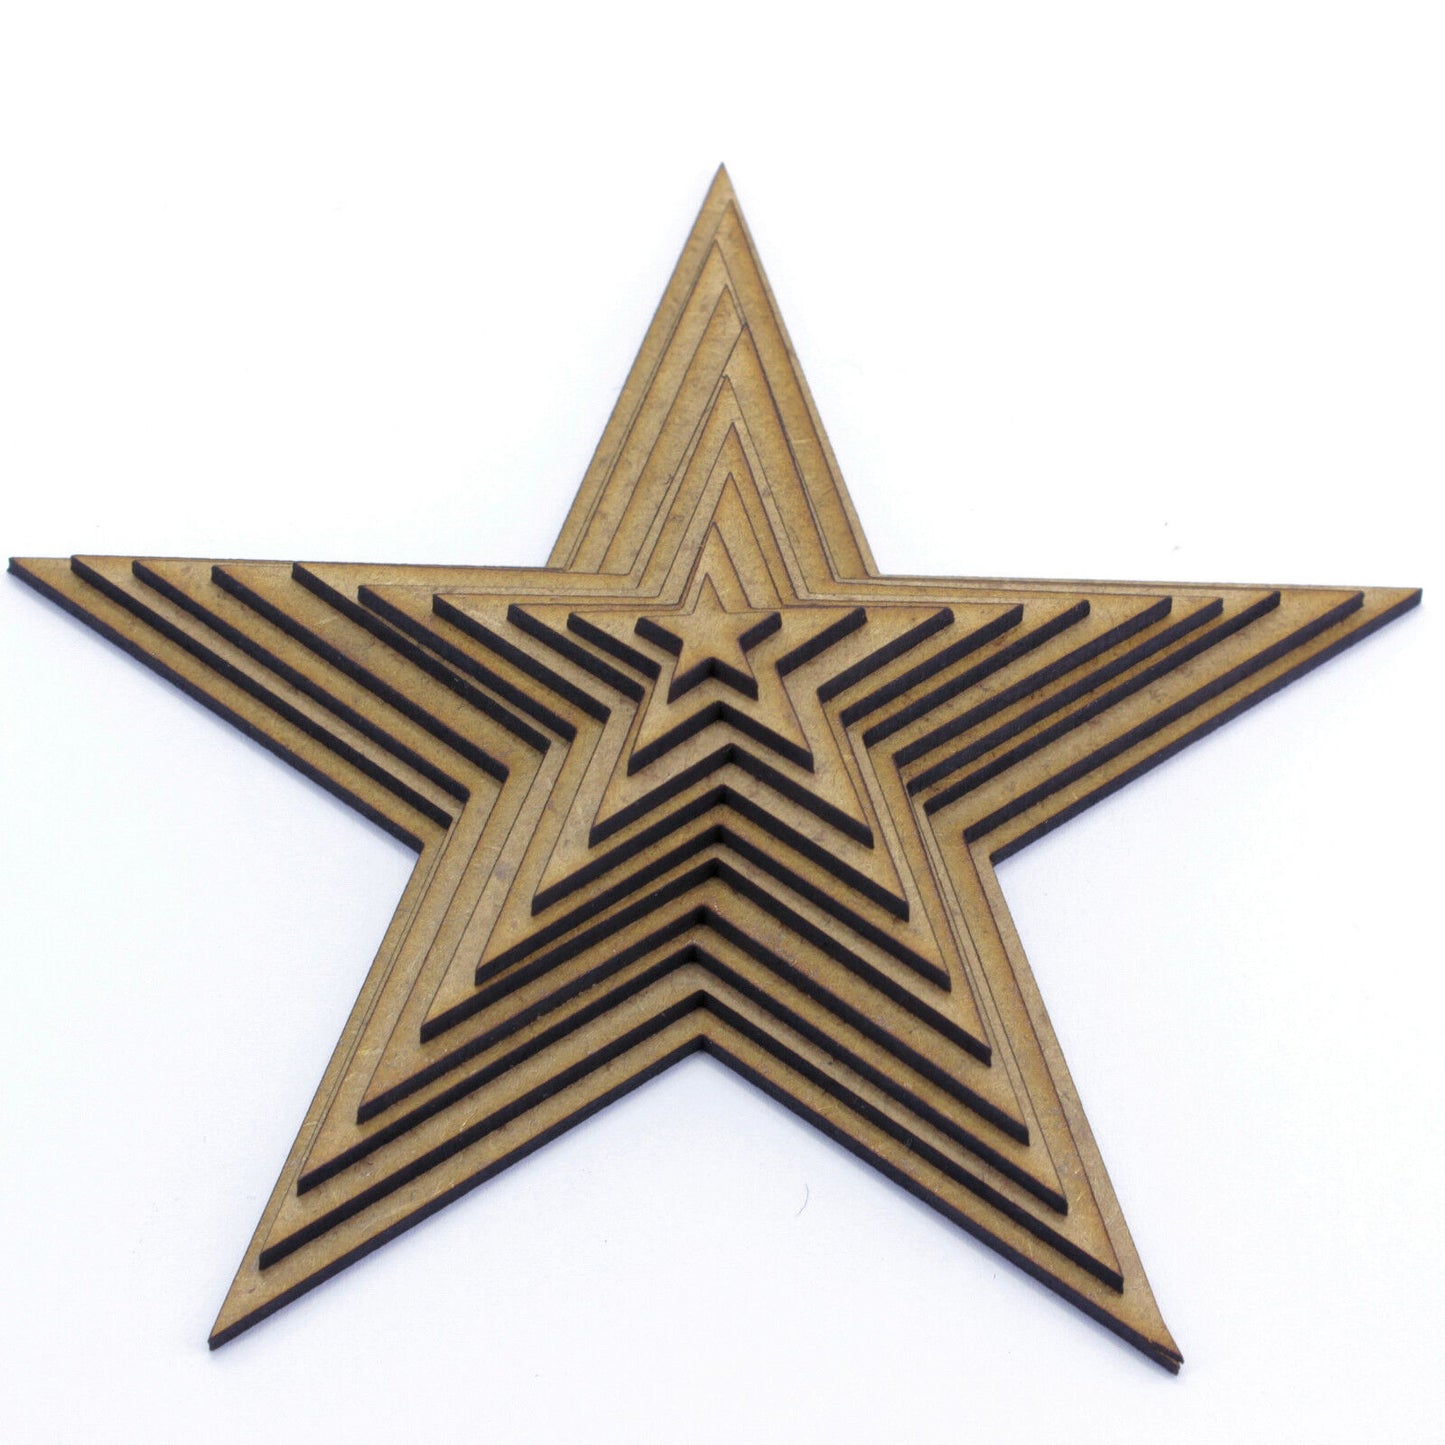 Star Craft Shape Blank, Various Sizes, 2mm MDF Wood. Mixed Media Art Project